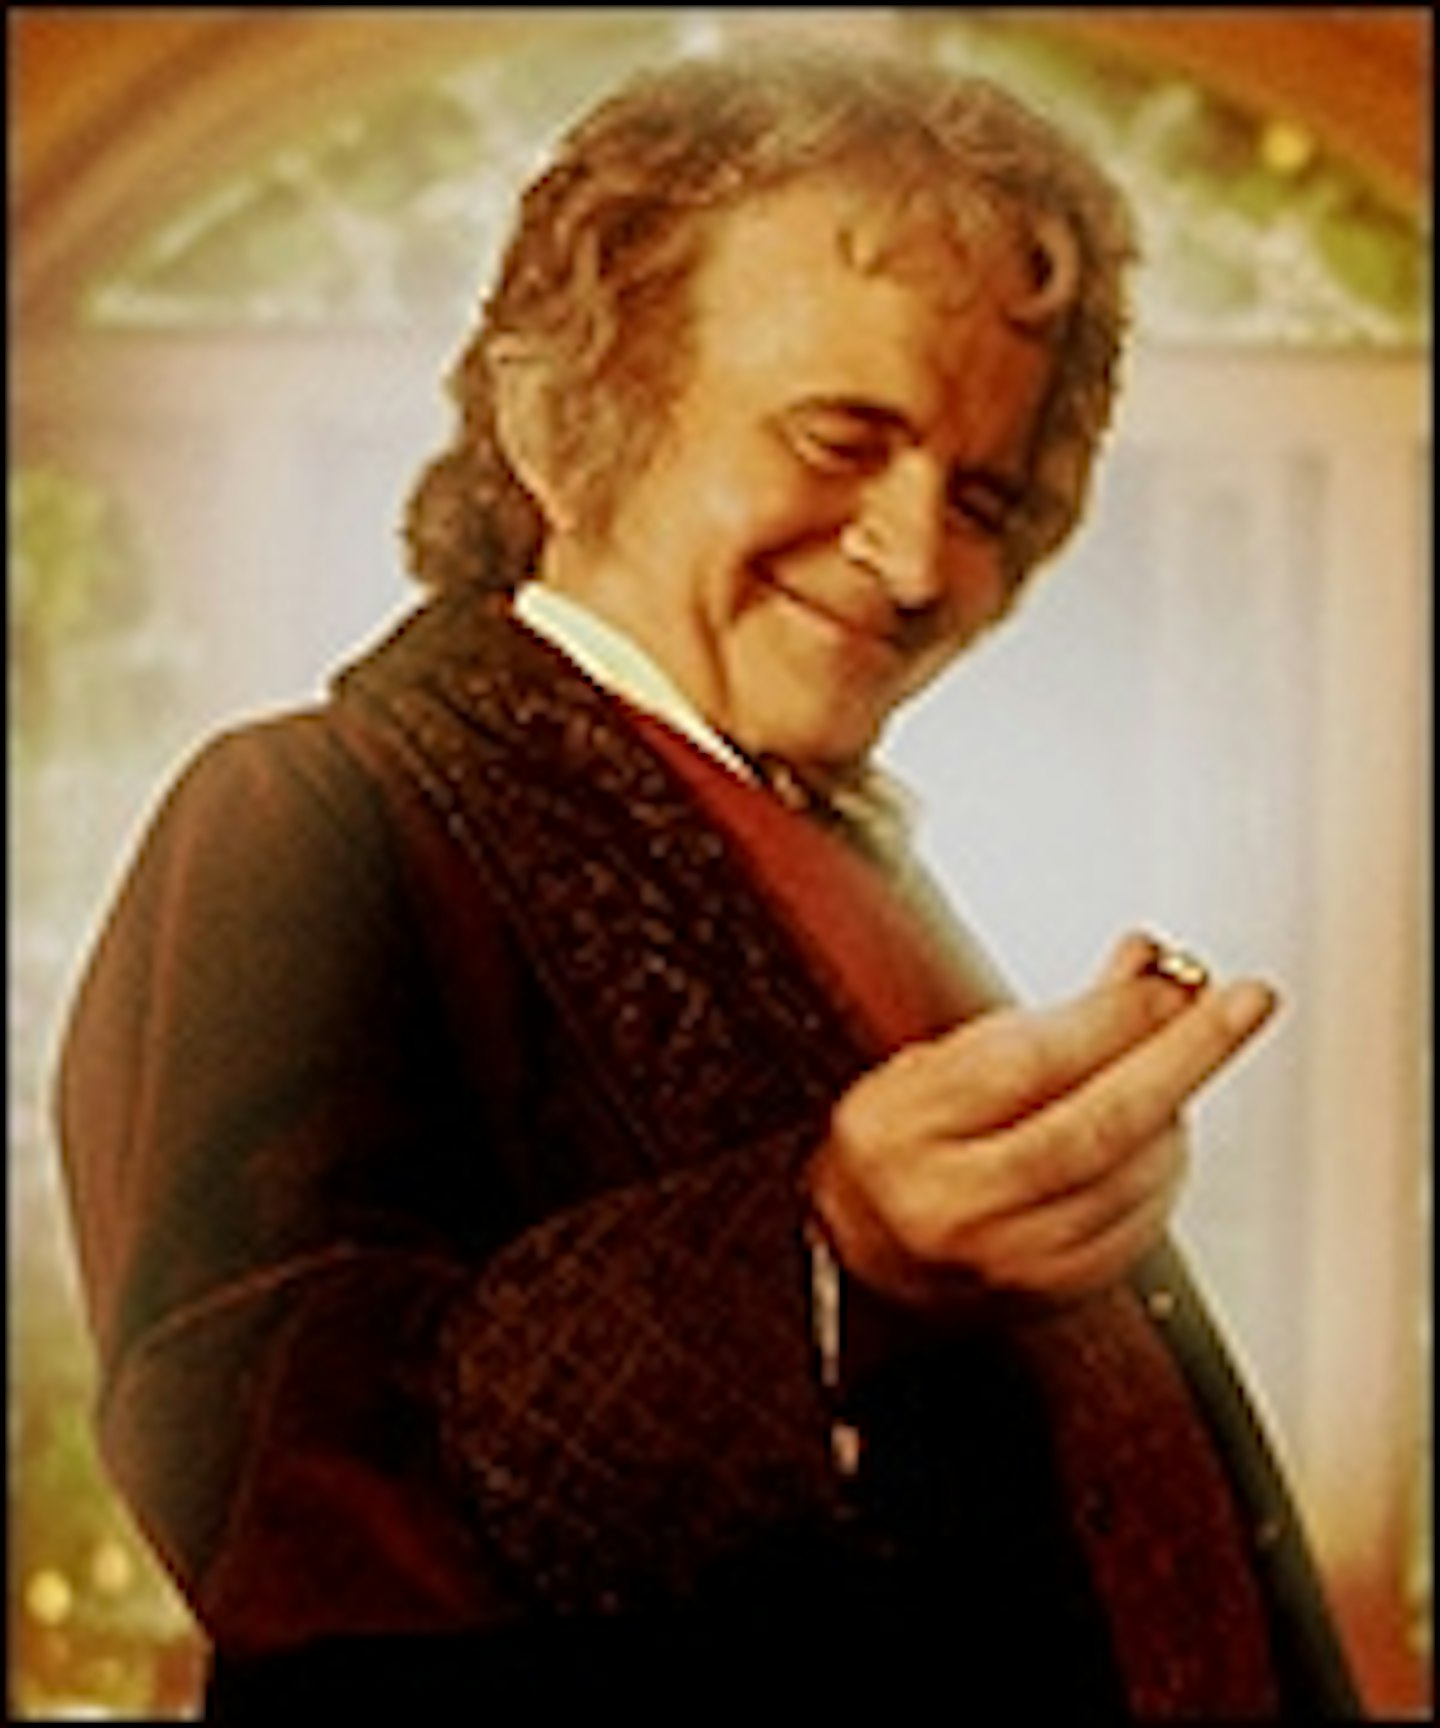 Ian Holm Confirmed For The Hobbit